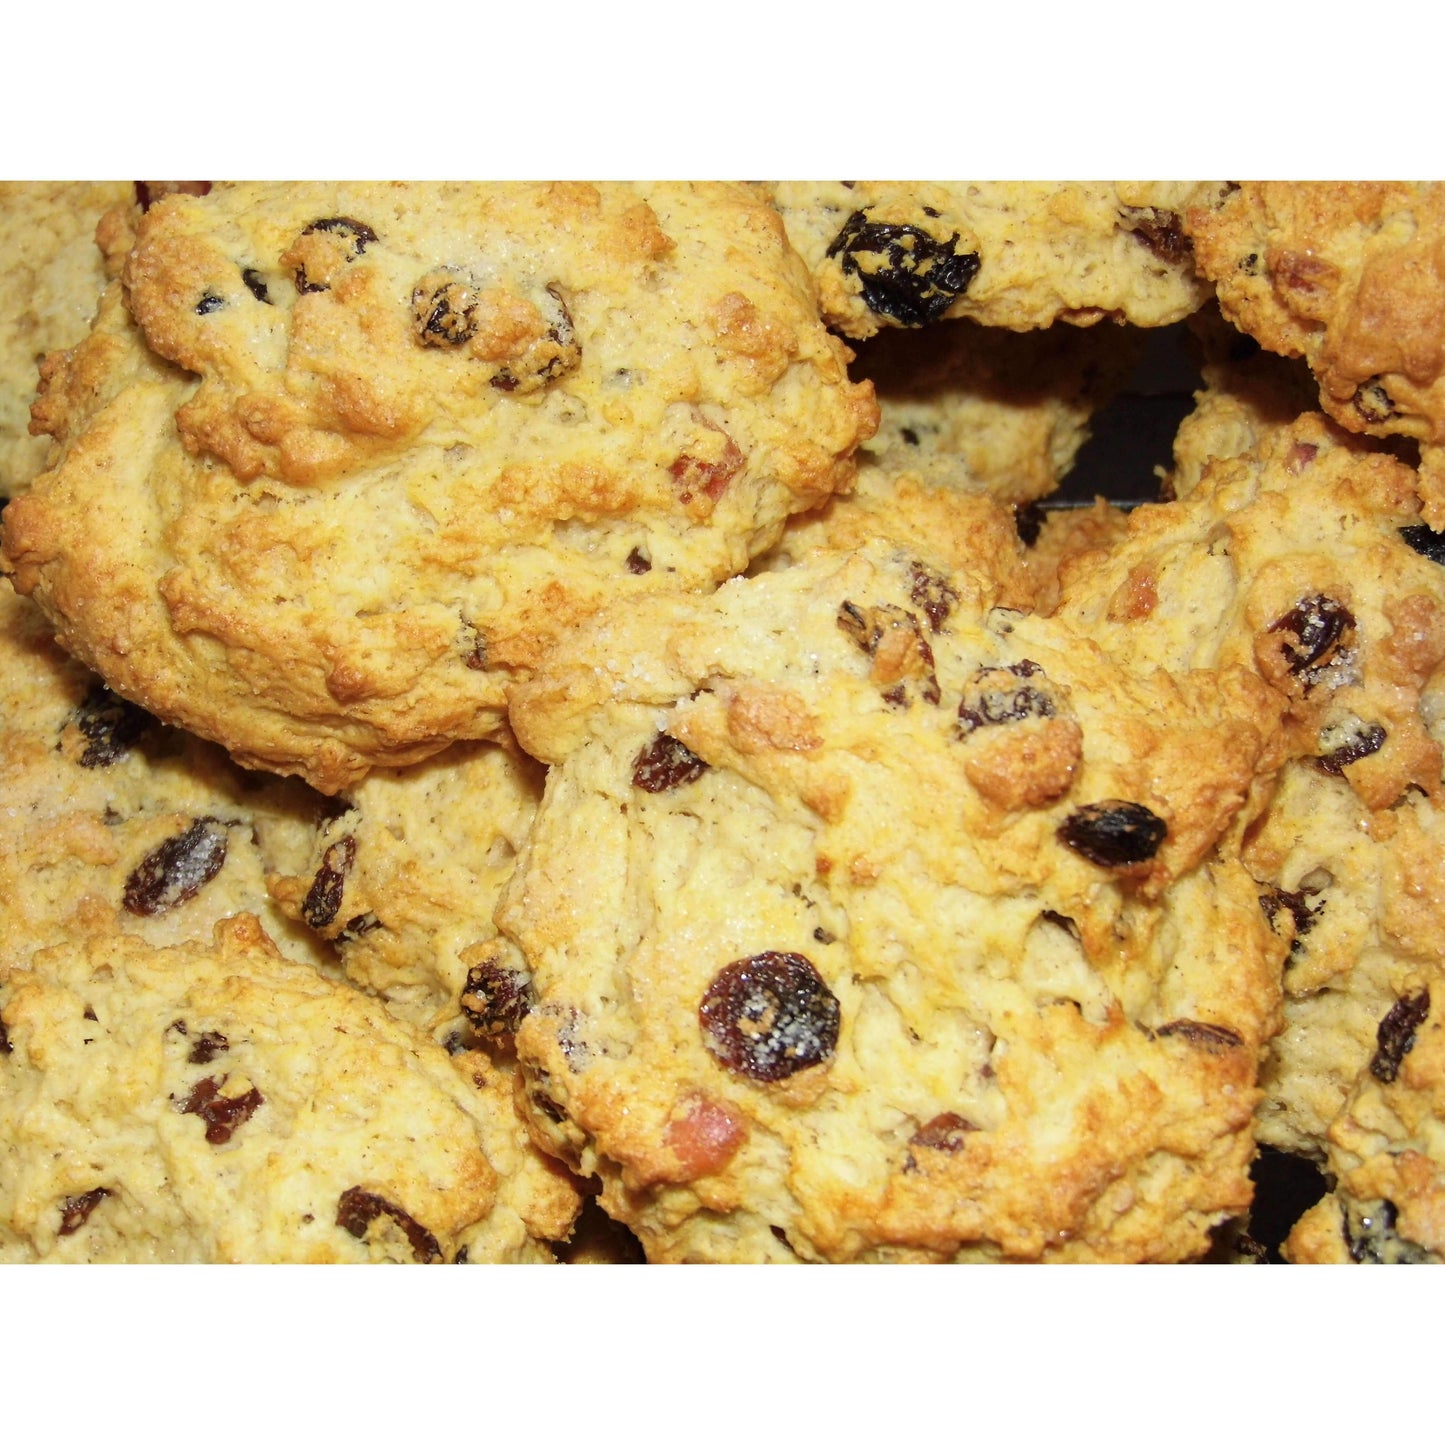 Very fruity Rock buns - from£10.50 - 6, 12 or 18 - The Cornish Scone Company